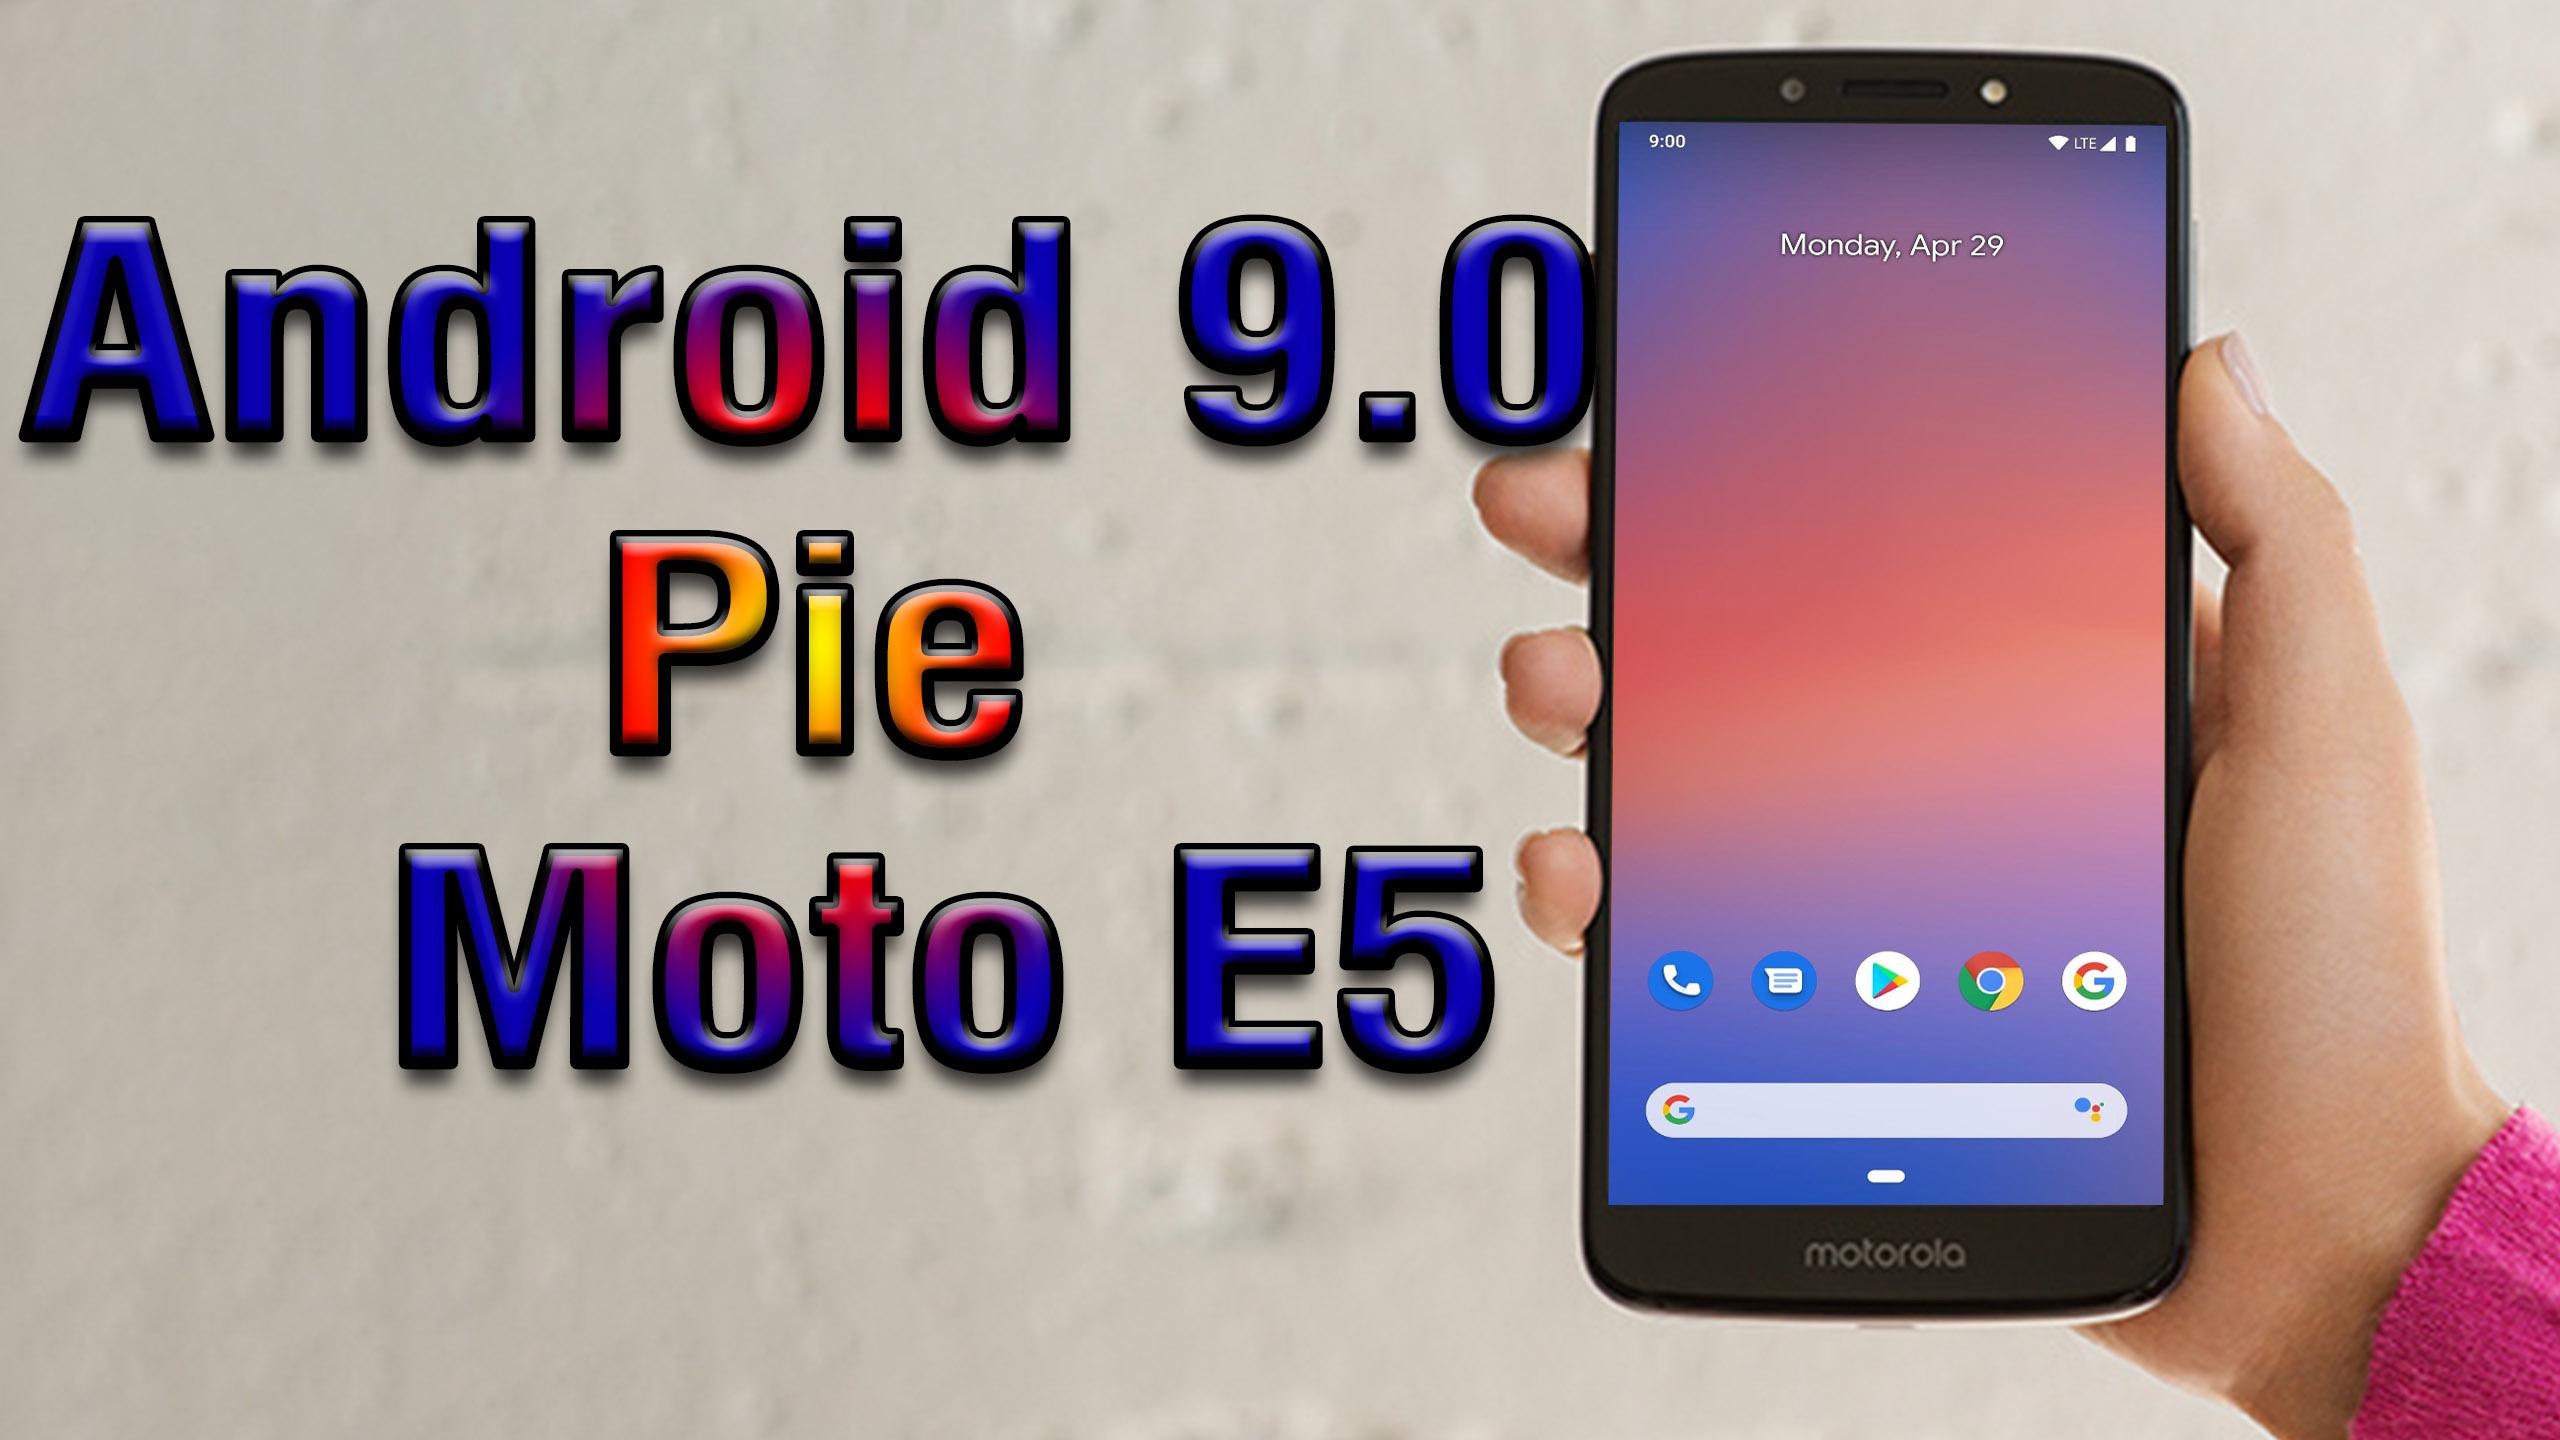 Install Moto G4 Play Pixel Experience Pie 9.0 Official ROM - Android  Infotech